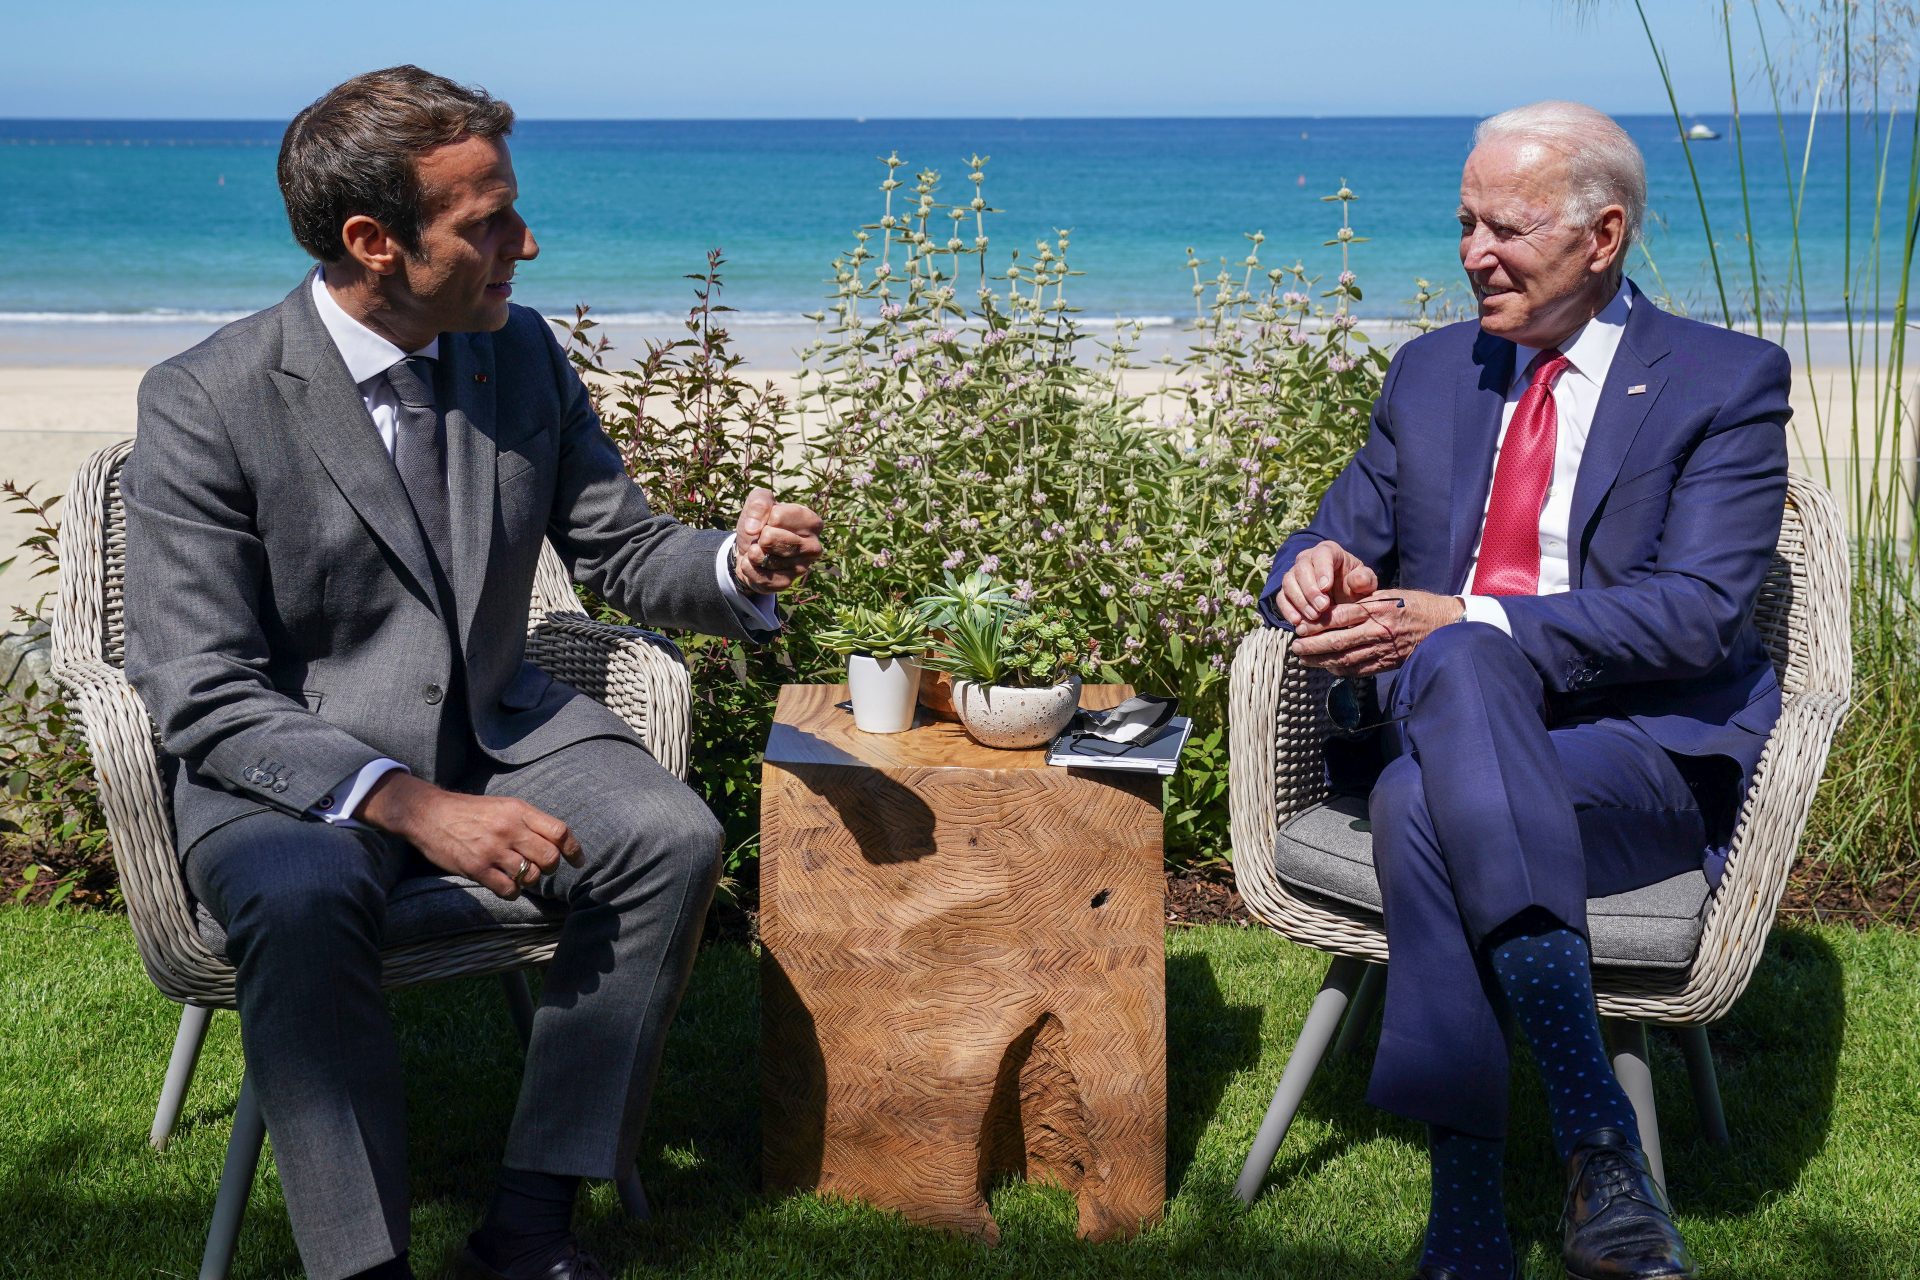 America is back with Biden, France’s Macron says